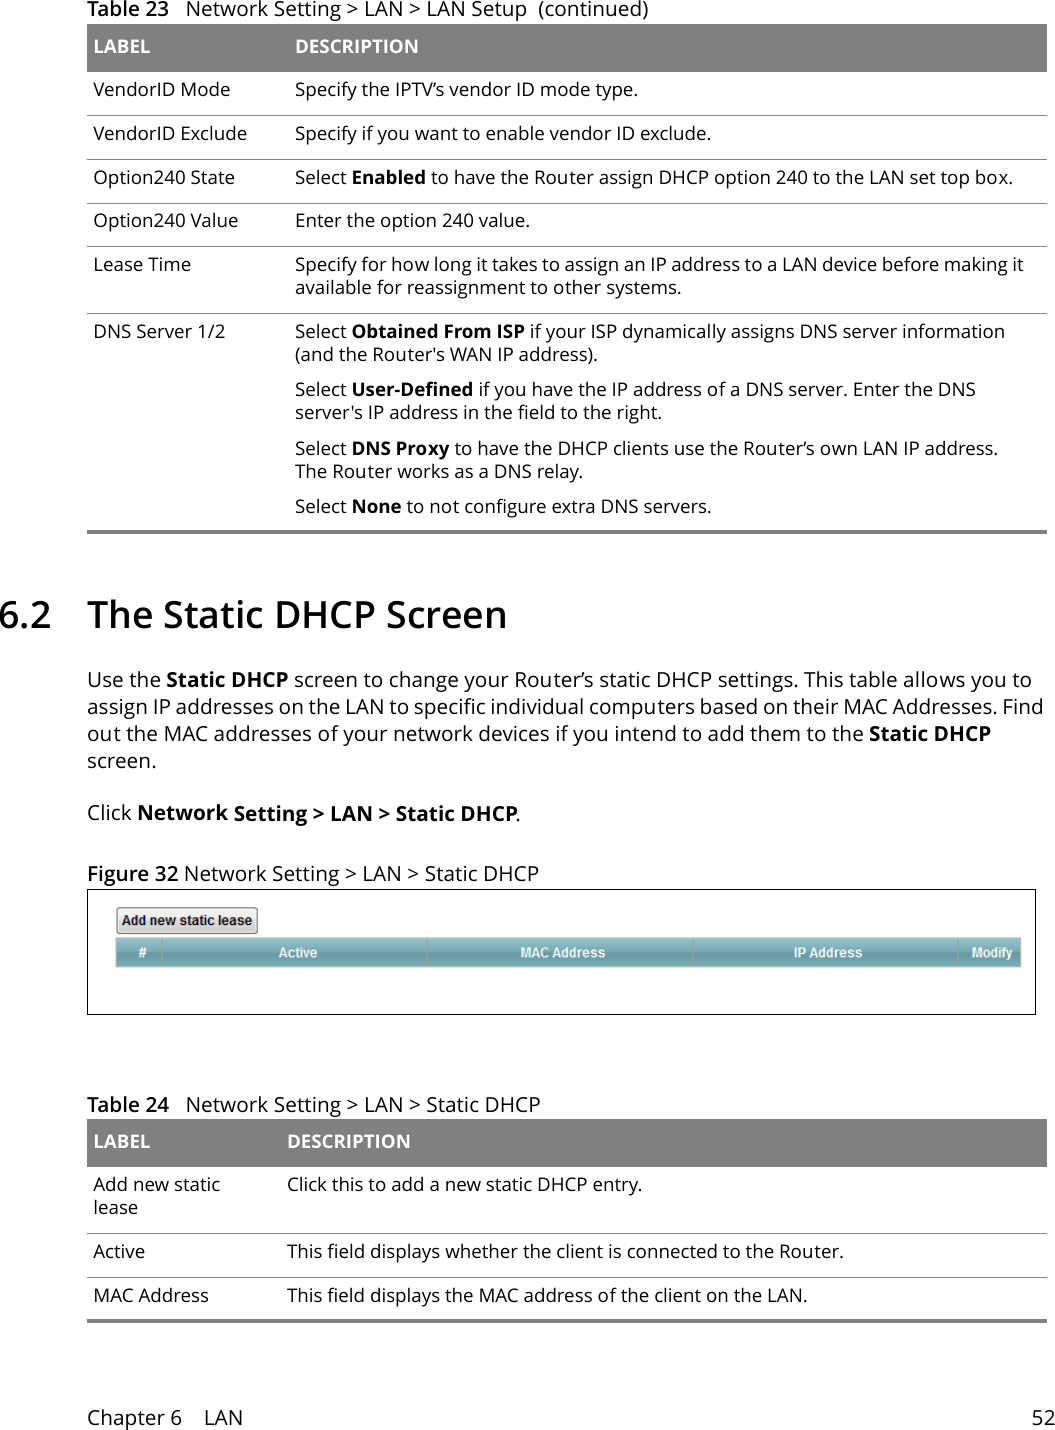 Chapter 6    LAN 526.2   The Static DHCP ScreenUse the Static DHCP screen to change your Router’s static DHCP settings. This table allows you to assign IP addresses on the LAN to specific individual computers based on their MAC Addresses. Find out the MAC addresses of your network devices if you intend to add them to the Static DHCP screen.Click Network Setting &gt; LAN &gt; Static DHCP.Figure 32 Network Setting &gt; LAN &gt; Static DHCP VendorID Mode Specify the IPTV’s vendor ID mode type.VendorID Exclude Specify if you want to enable vendor ID exclude.Option240 State Select Enabled to have the Router assign DHCP option 240 to the LAN set top box.Option240 Value Enter the option 240 value.Lease Time Specify for how long it takes to assign an IP address to a LAN device before making it available for reassignment to other systems.DNS Server 1/2 Select Obtained From ISP if your ISP dynamically assigns DNS server information (and the Router&apos;s WAN IP address).Select User-Defined if you have the IP address of a DNS server. Enter the DNS server&apos;s IP address in the field to the right. Select DNS Proxy to have the DHCP clients use the Router’s own LAN IP address. The Router works as a DNS relay. Select None to not configure extra DNS servers. Table 23   Network Setting &gt; LAN &gt; LAN Setup  (continued)LABEL DESCRIPTIONTable 24   Network Setting &gt; LAN &gt; Static DHCP LABEL DESCRIPTIONAdd new static leaseClick this to add a new static DHCP entry. Active This field displays whether the client is connected to the Router.MAC Address This field displays the MAC address of the client on the LAN.